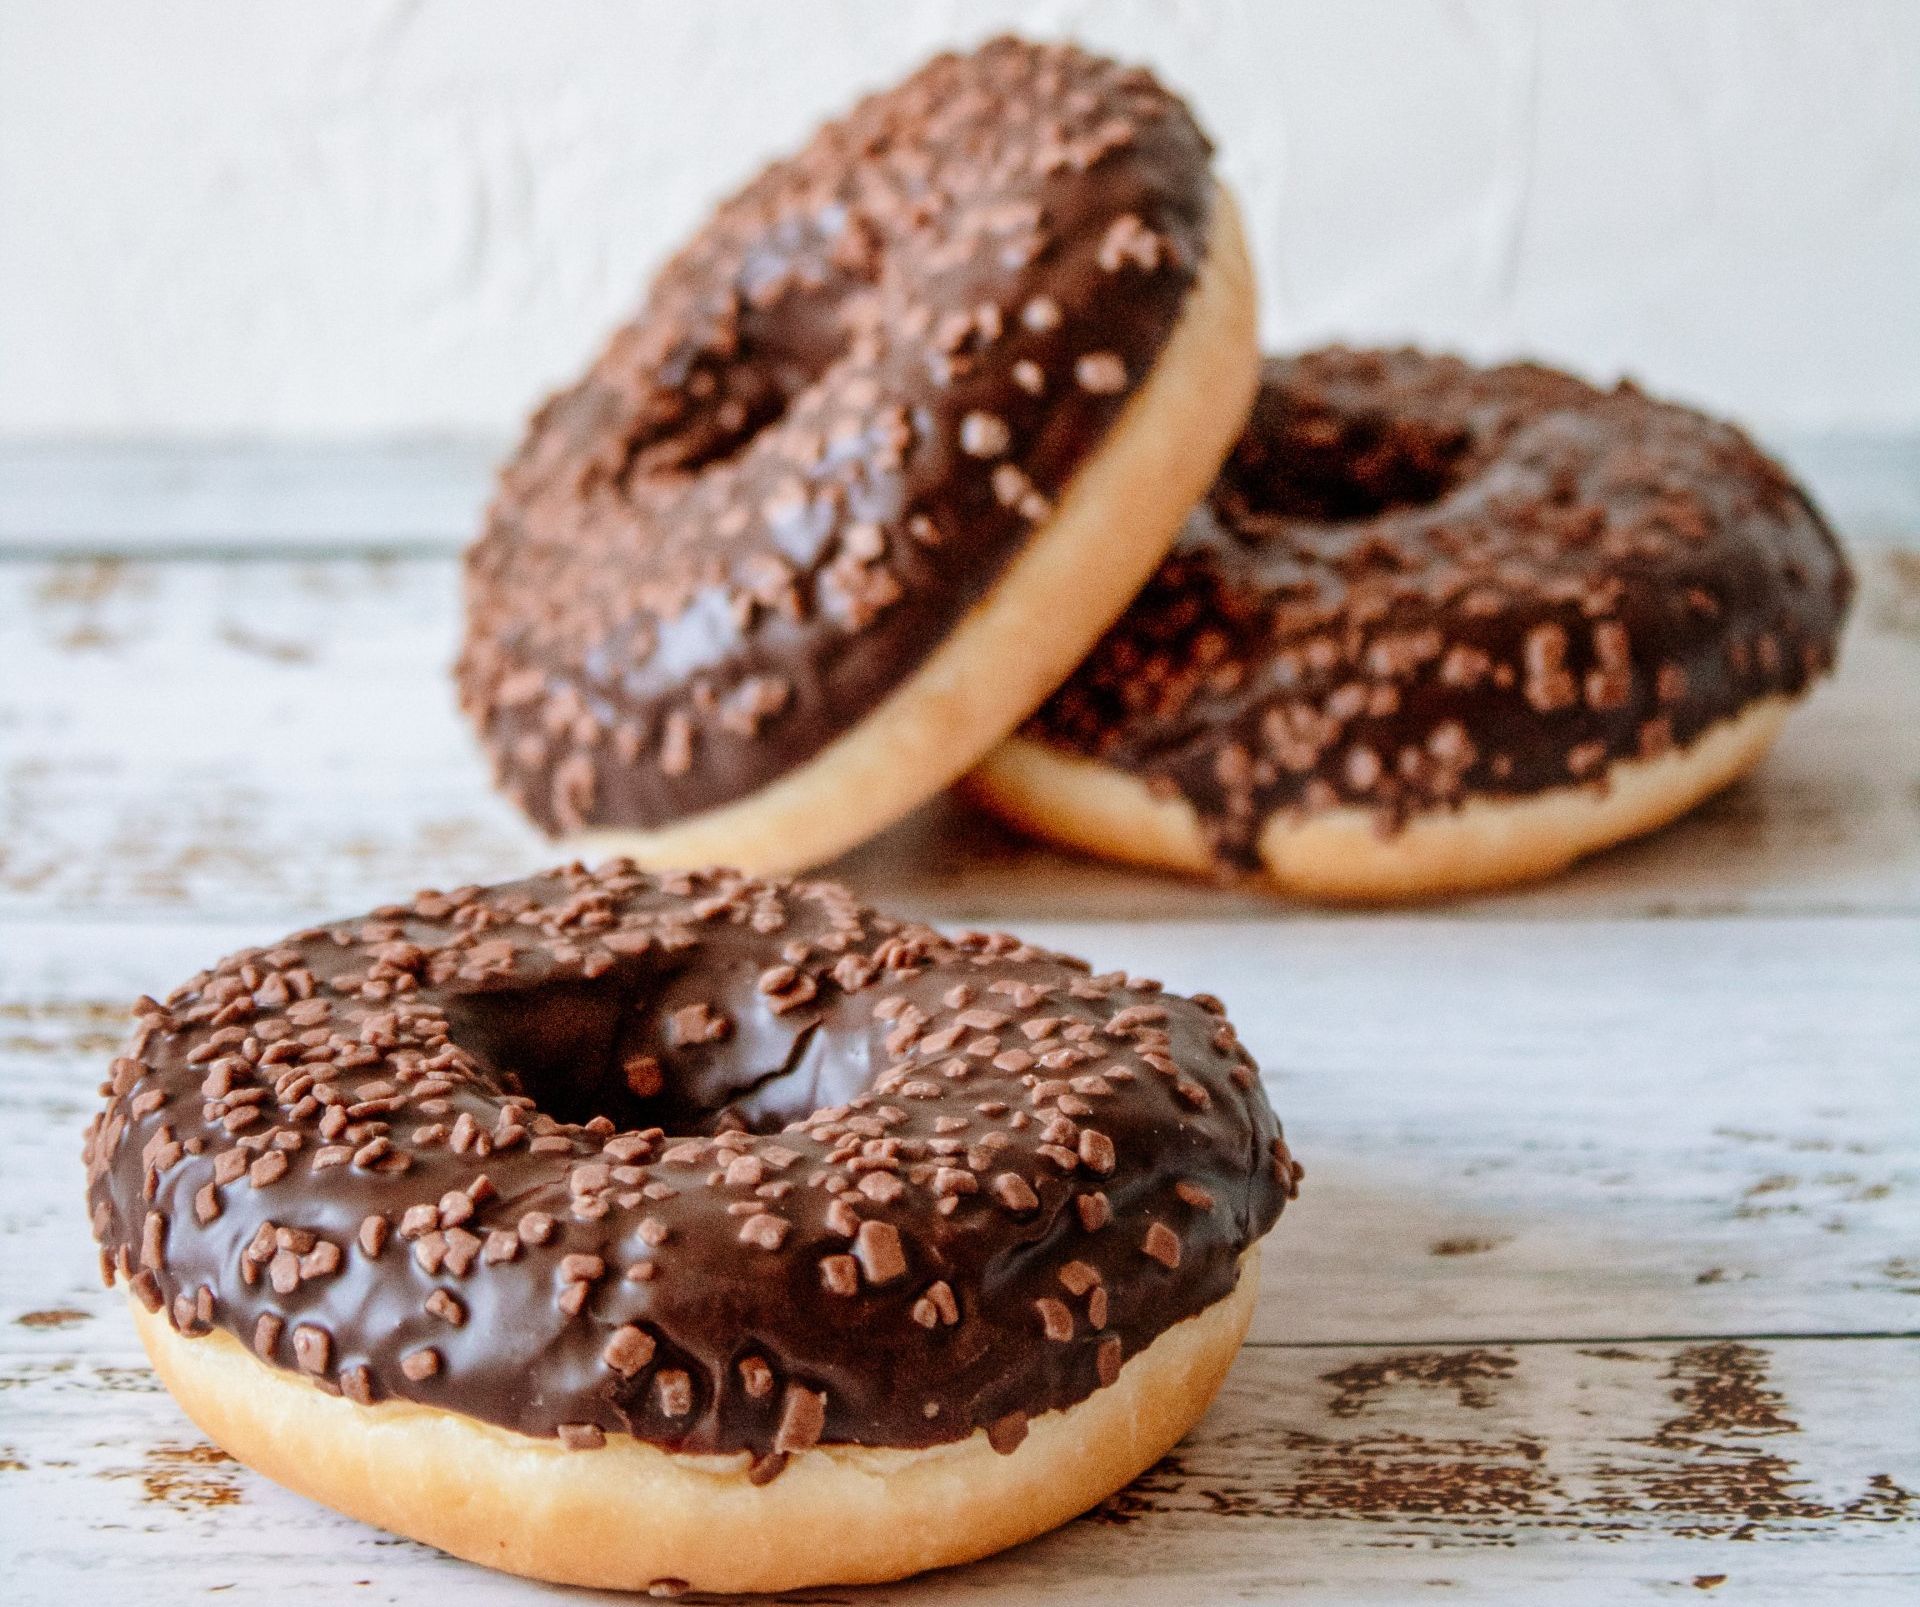 What are the best donuts?